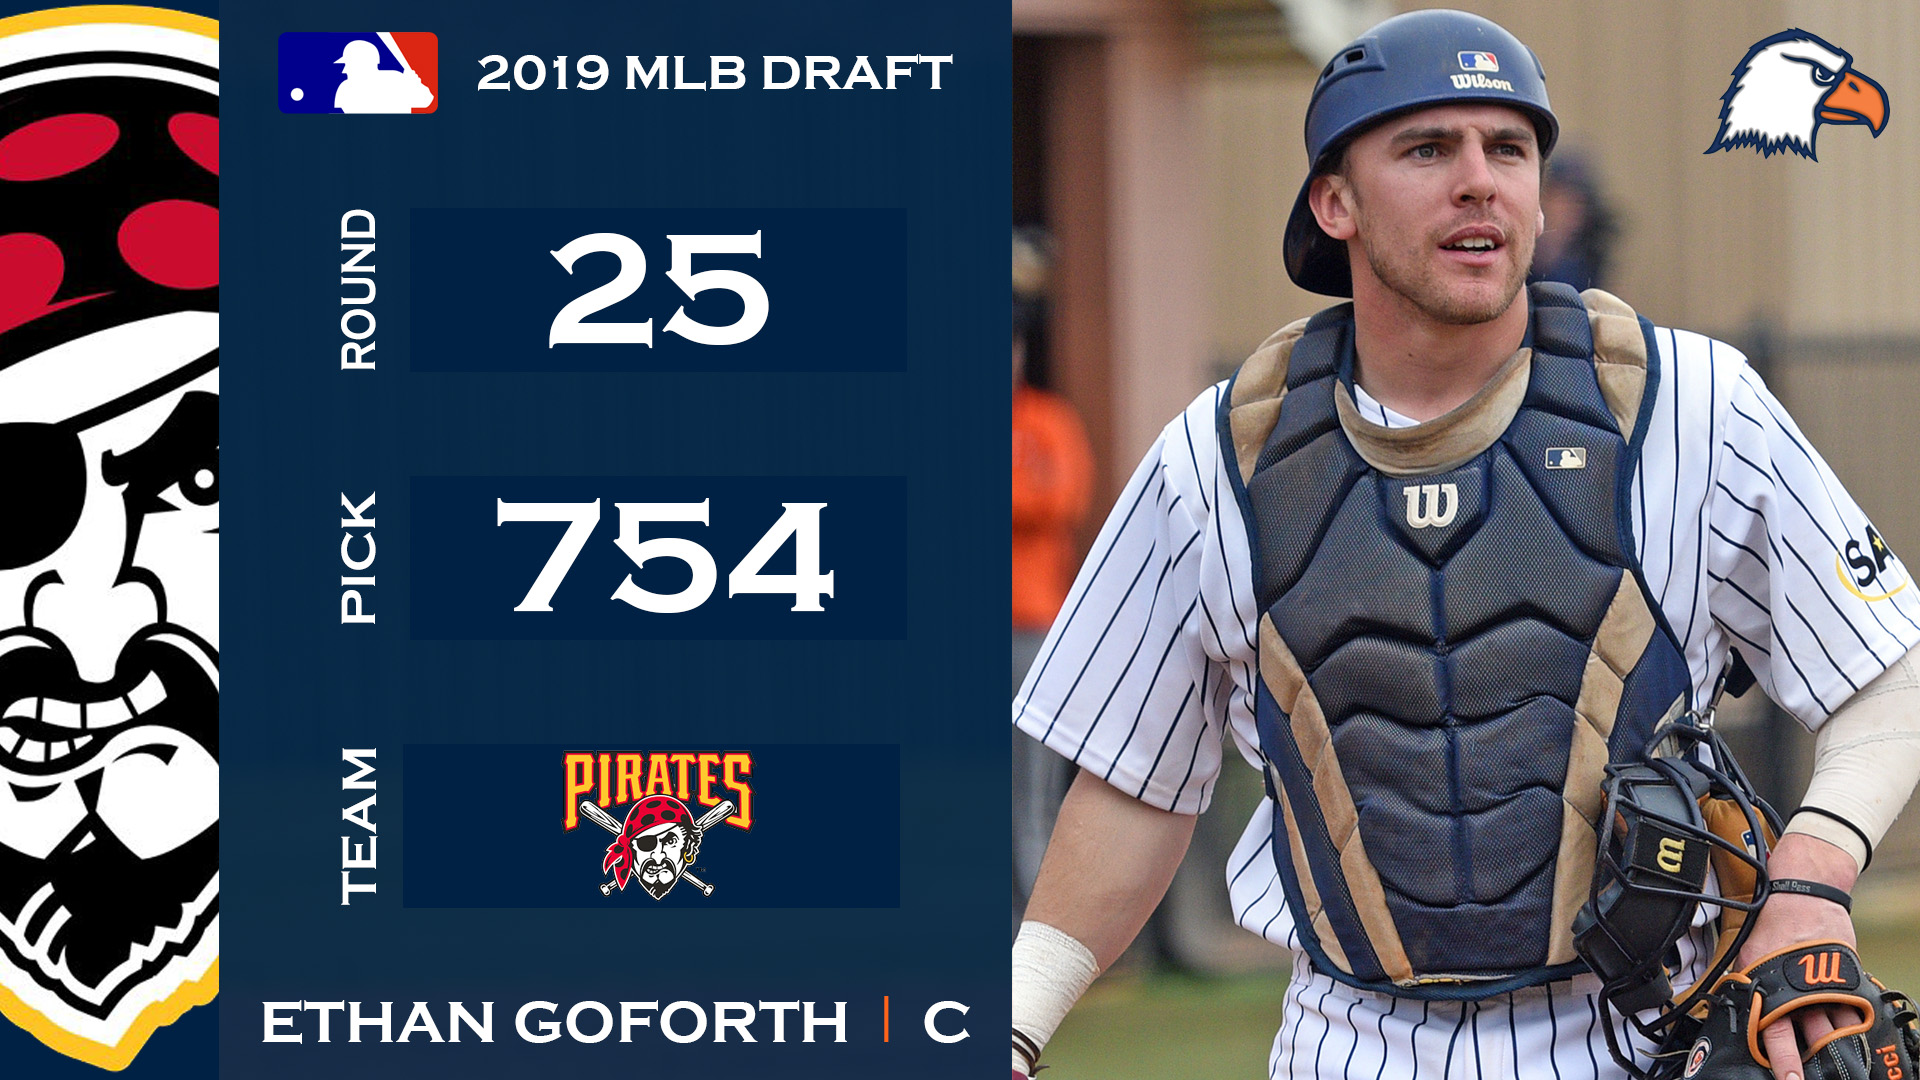 Goforth drafted in 25th round of MLB Draft by Pirates